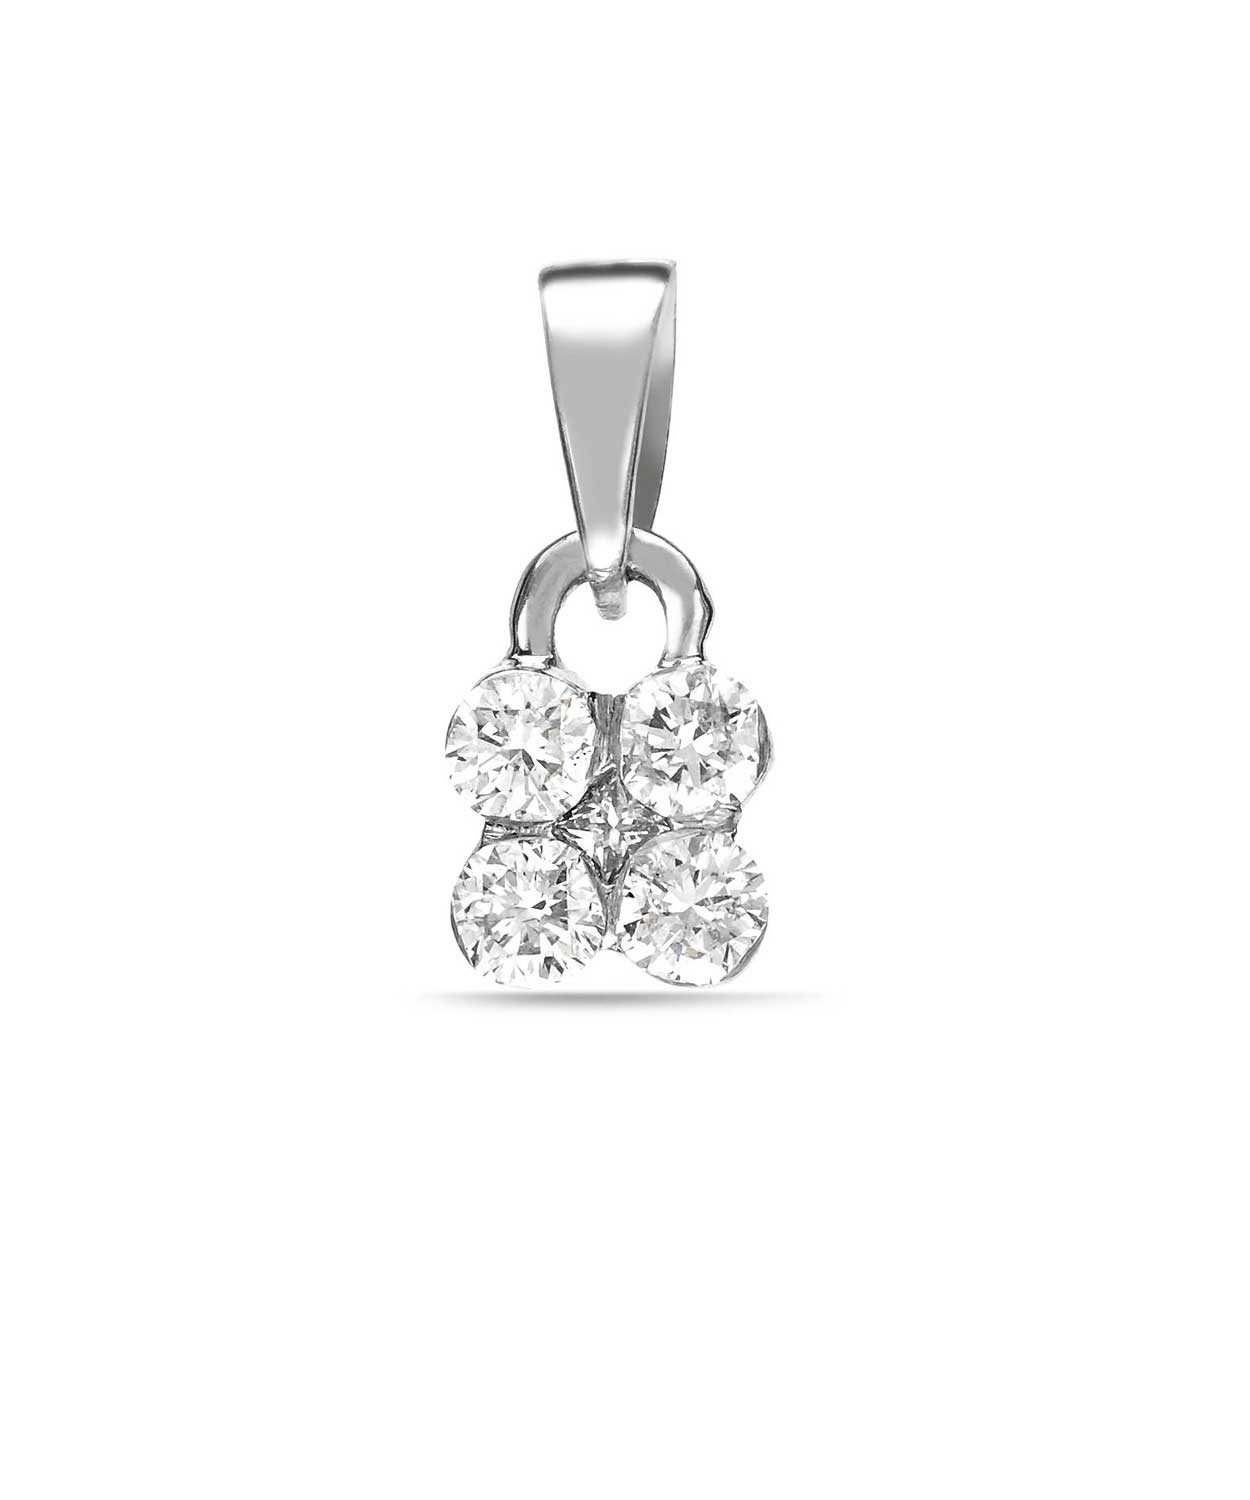 Le Petit Collection 0.26 ctw Diamonds 14k White Gold Dainty Pendant (chain not included) View 1